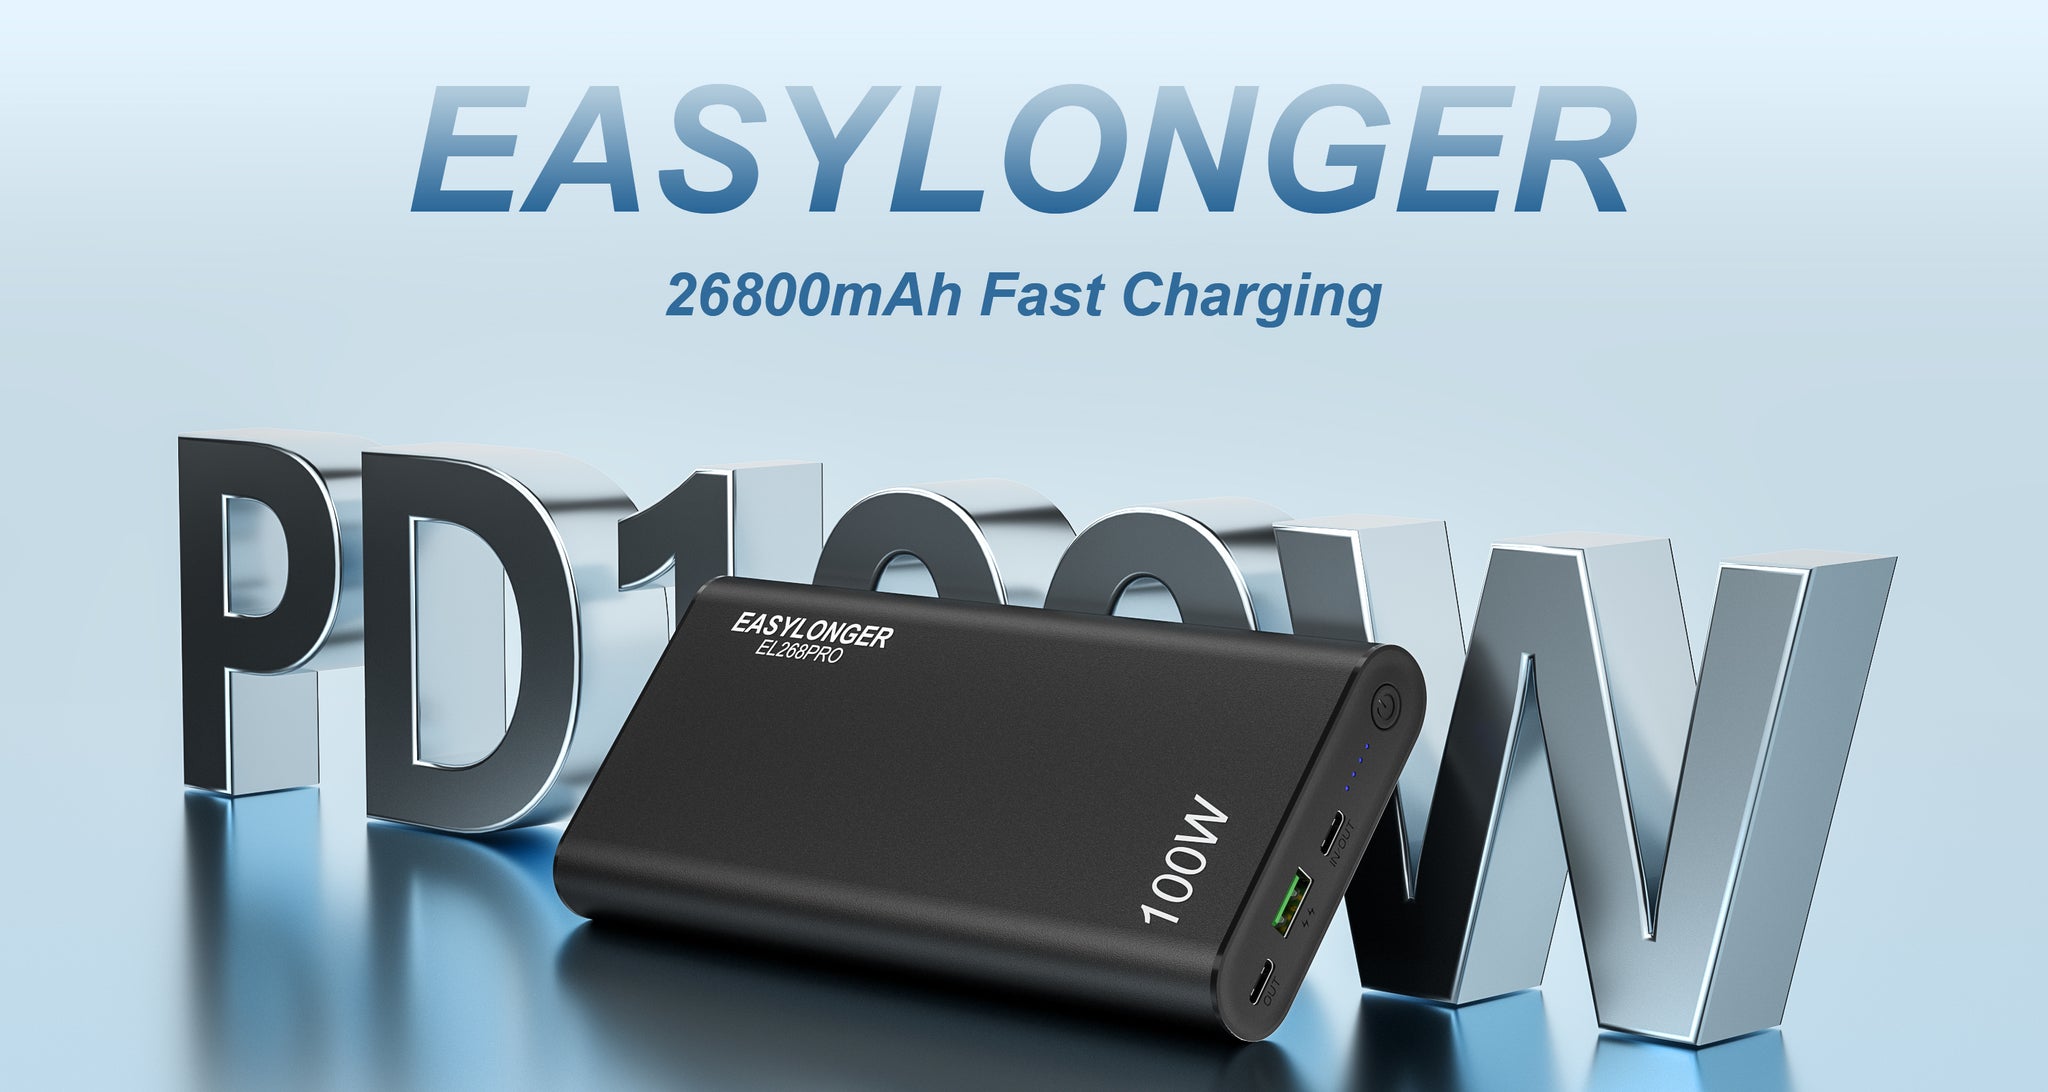 Best PD Power Bank 2022 The best portable chargers for your smartpho